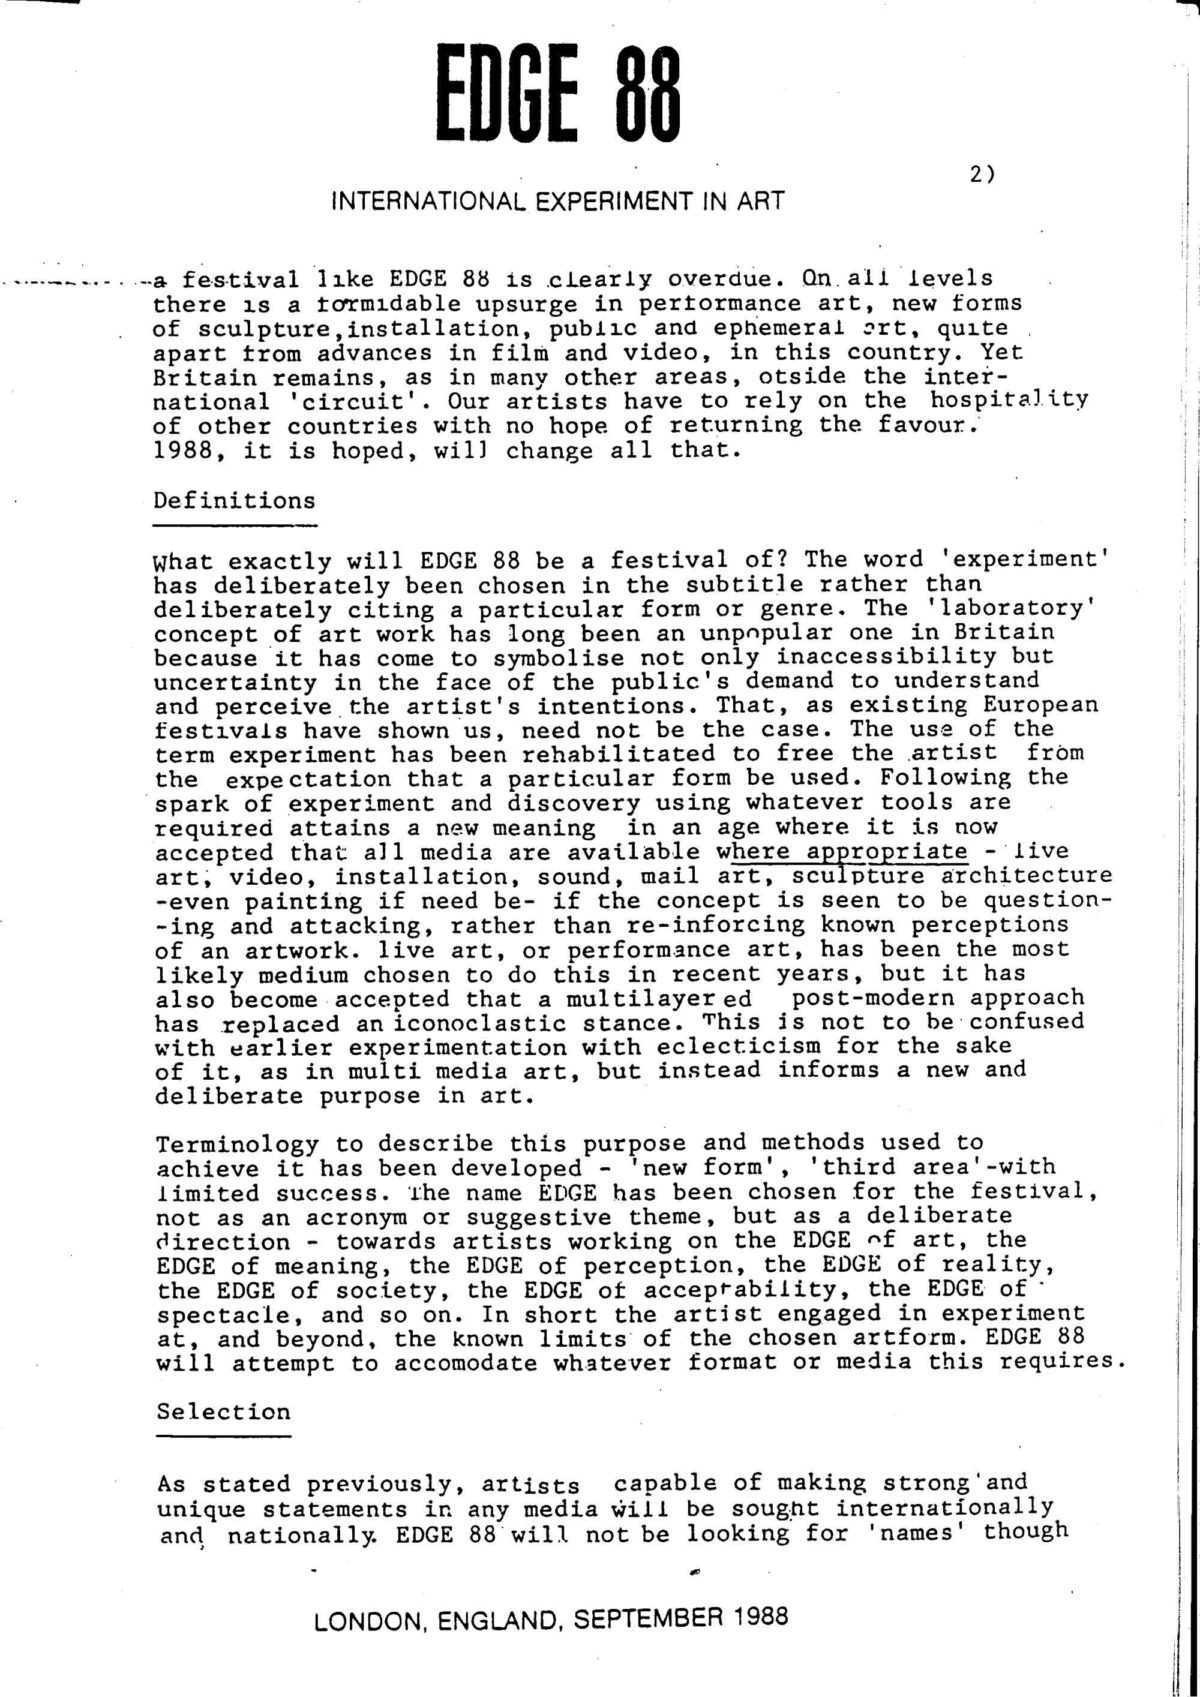 Rationale, 1988 (Page 2 of 5)